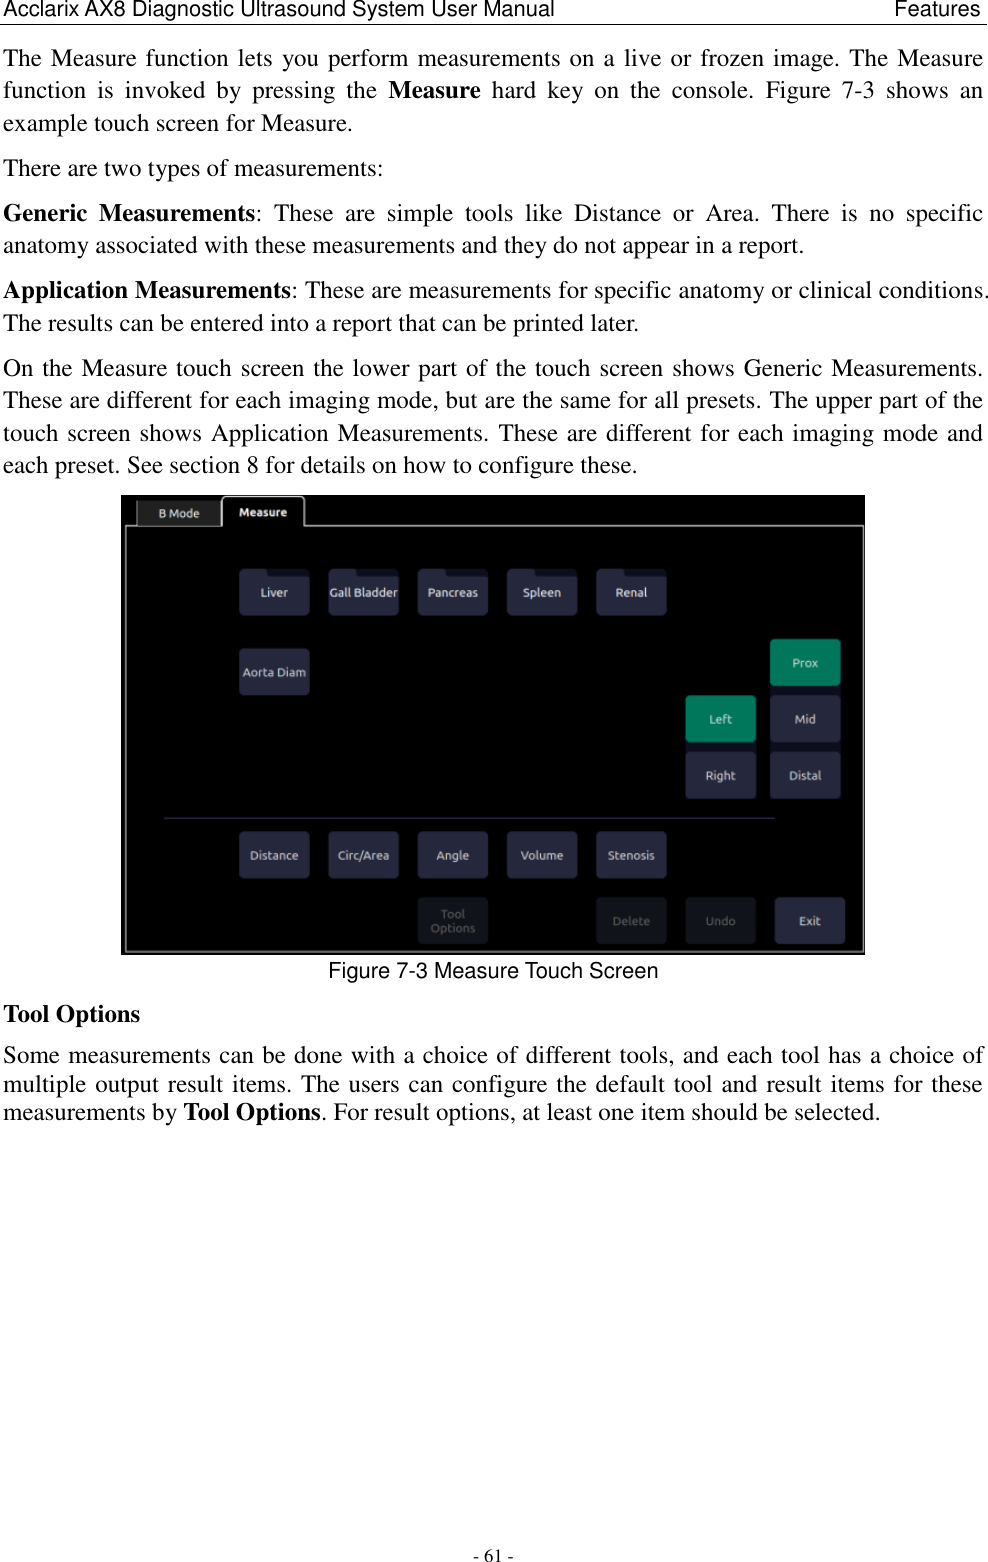 Acclarix AX8 Diagnostic Ultrasound System User Manual                                                              Features - 61 - The Measure function lets you perform measurements on a live or frozen image. The Measure function  is  invoked  by  pressing  the  Measure  hard  key  on  the  console.  Figure  7-3  shows  an example touch screen for Measure. There are two types of measurements: Generic  Measurements:  These  are  simple  tools  like  Distance  or  Area.  There  is  no  specific anatomy associated with these measurements and they do not appear in a report. Application Measurements: These are measurements for specific anatomy or clinical conditions. The results can be entered into a report that can be printed later. On the Measure touch screen the lower part of the touch screen shows Generic Measurements. These are different for each imaging mode, but are the same for all presets. The upper part of the touch screen shows Application Measurements. These are different for each imaging mode and each preset. See section 8 for details on how to configure these.  Figure 7-3 Measure Touch Screen Tool Options Some measurements can be done with a choice of different tools, and each tool has a choice of multiple output result items. The users can configure the default tool and result items for these measurements by Tool Options. For result options, at least one item should be selected.   